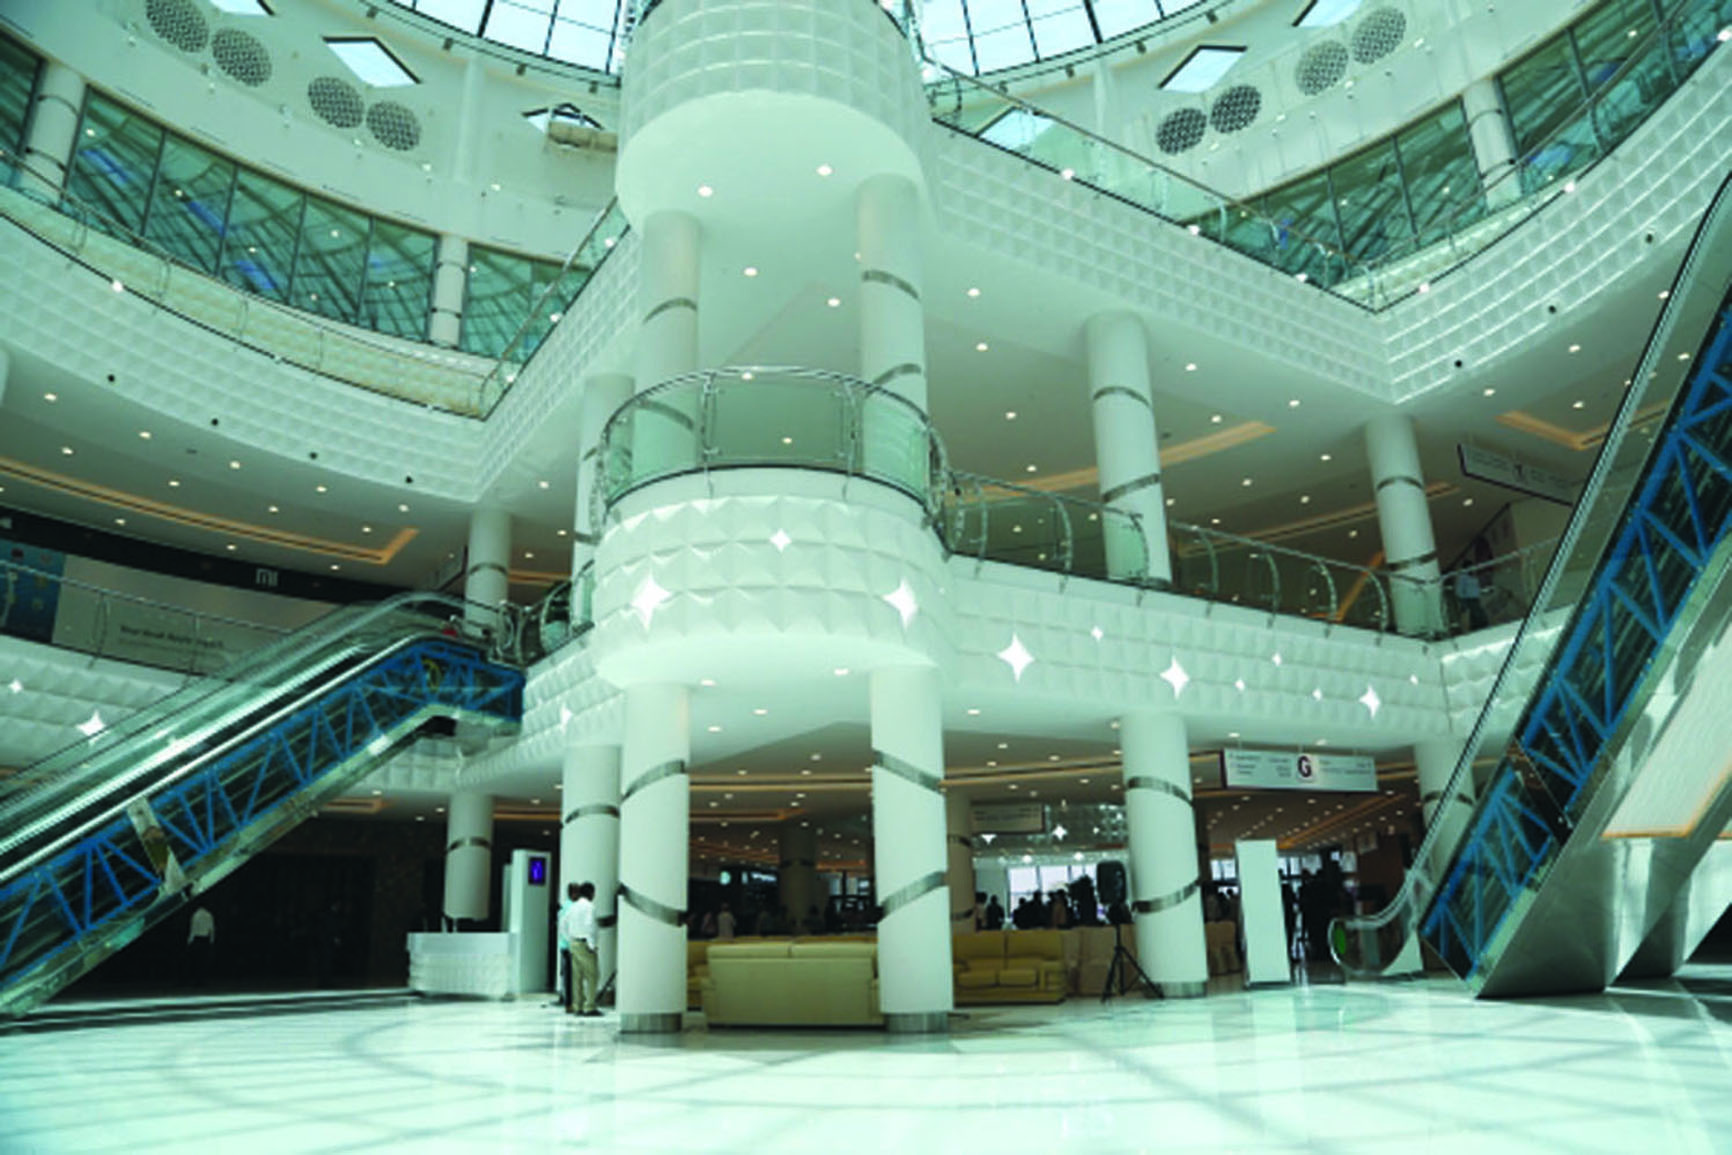 Oman retail: Muscat ranked 25th in global shopping centre development report